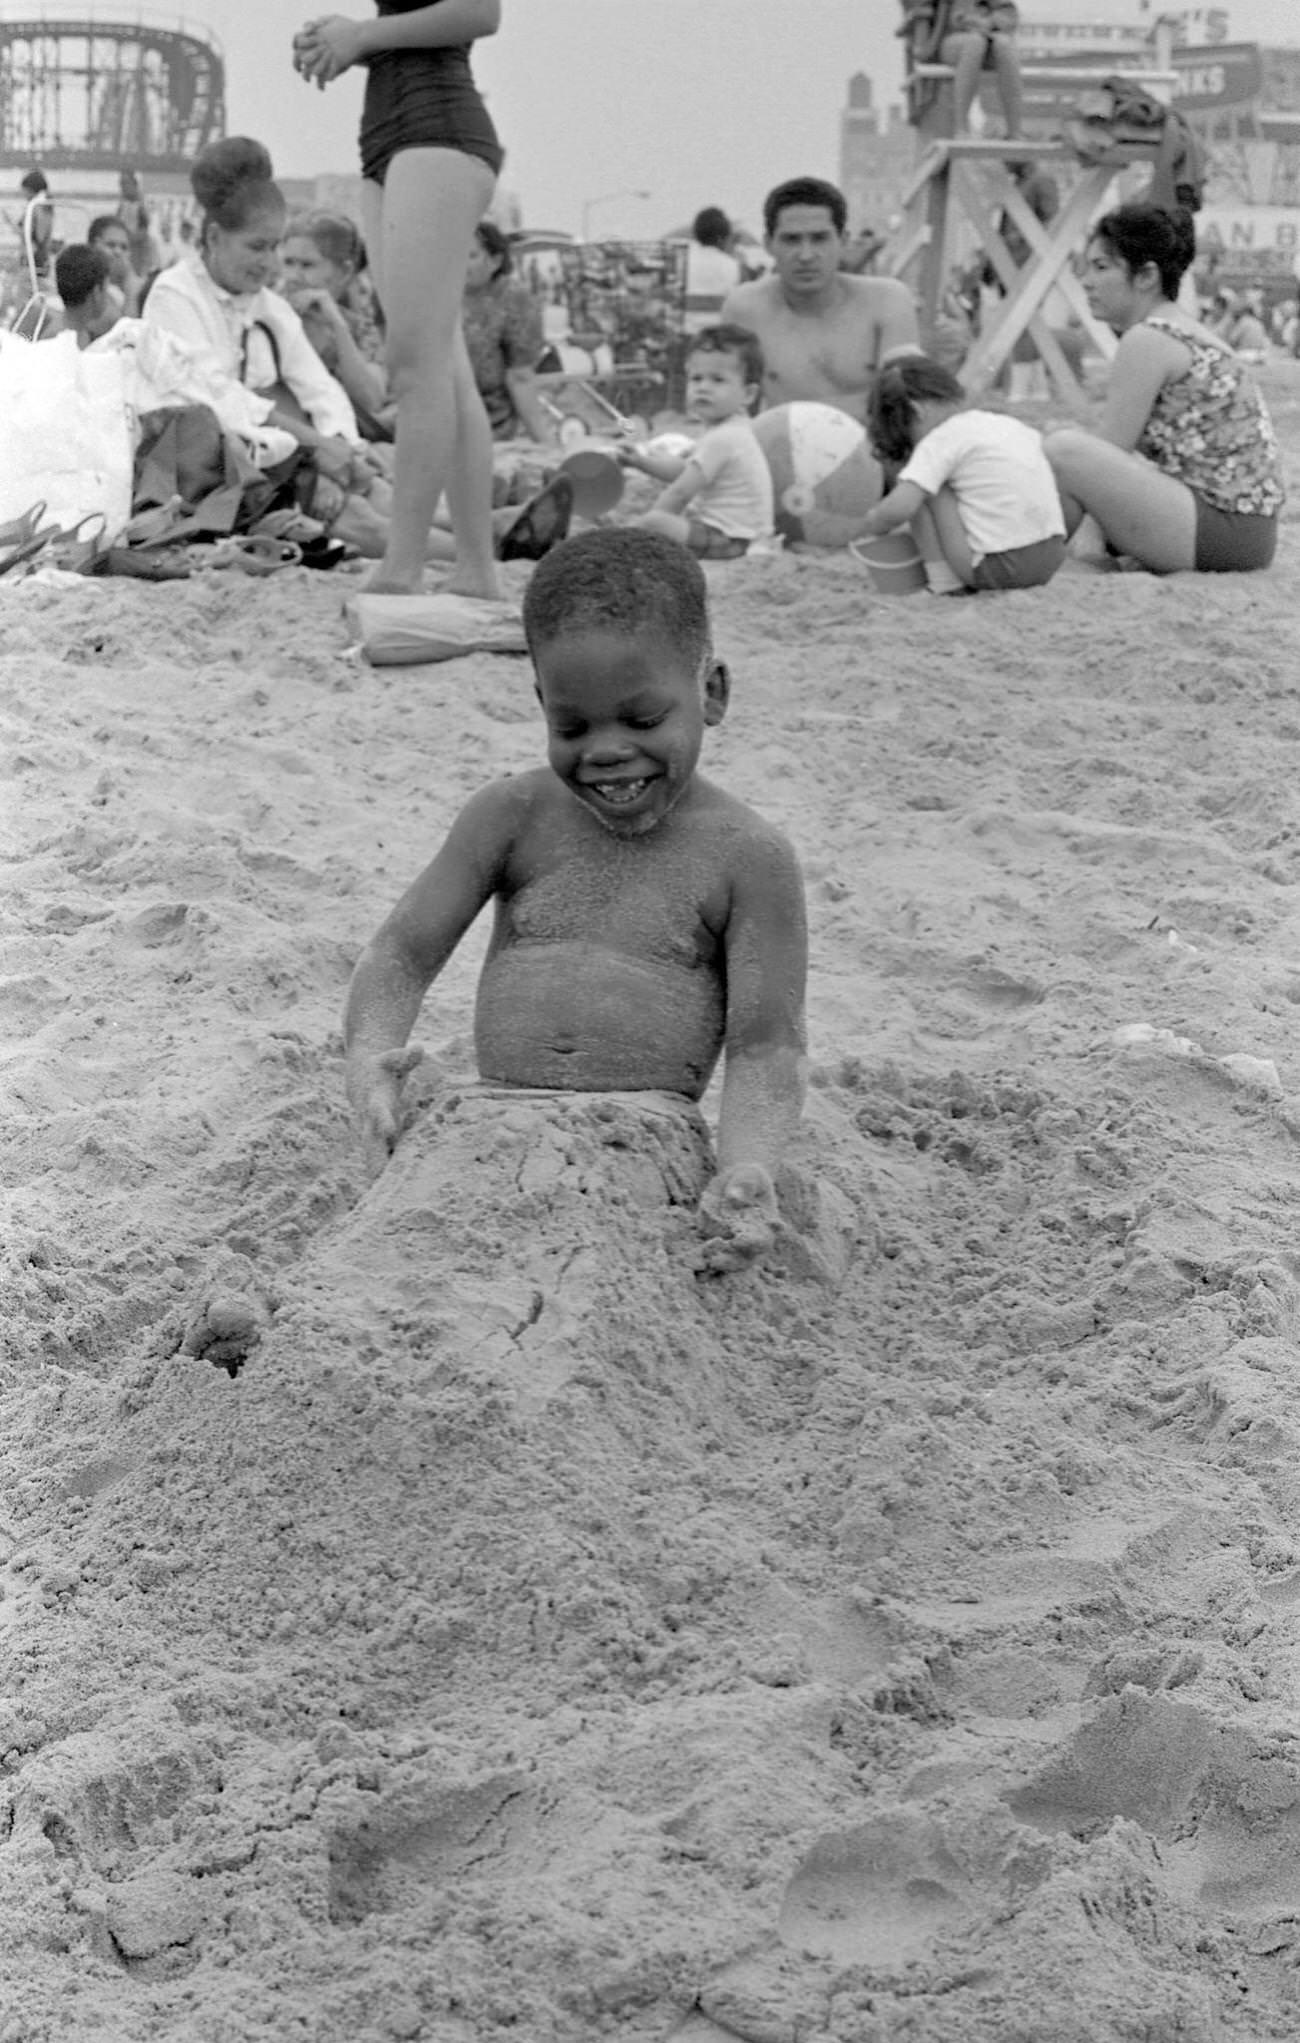 Laughing Boy Half-Buried In Coney Island Sand, 1968